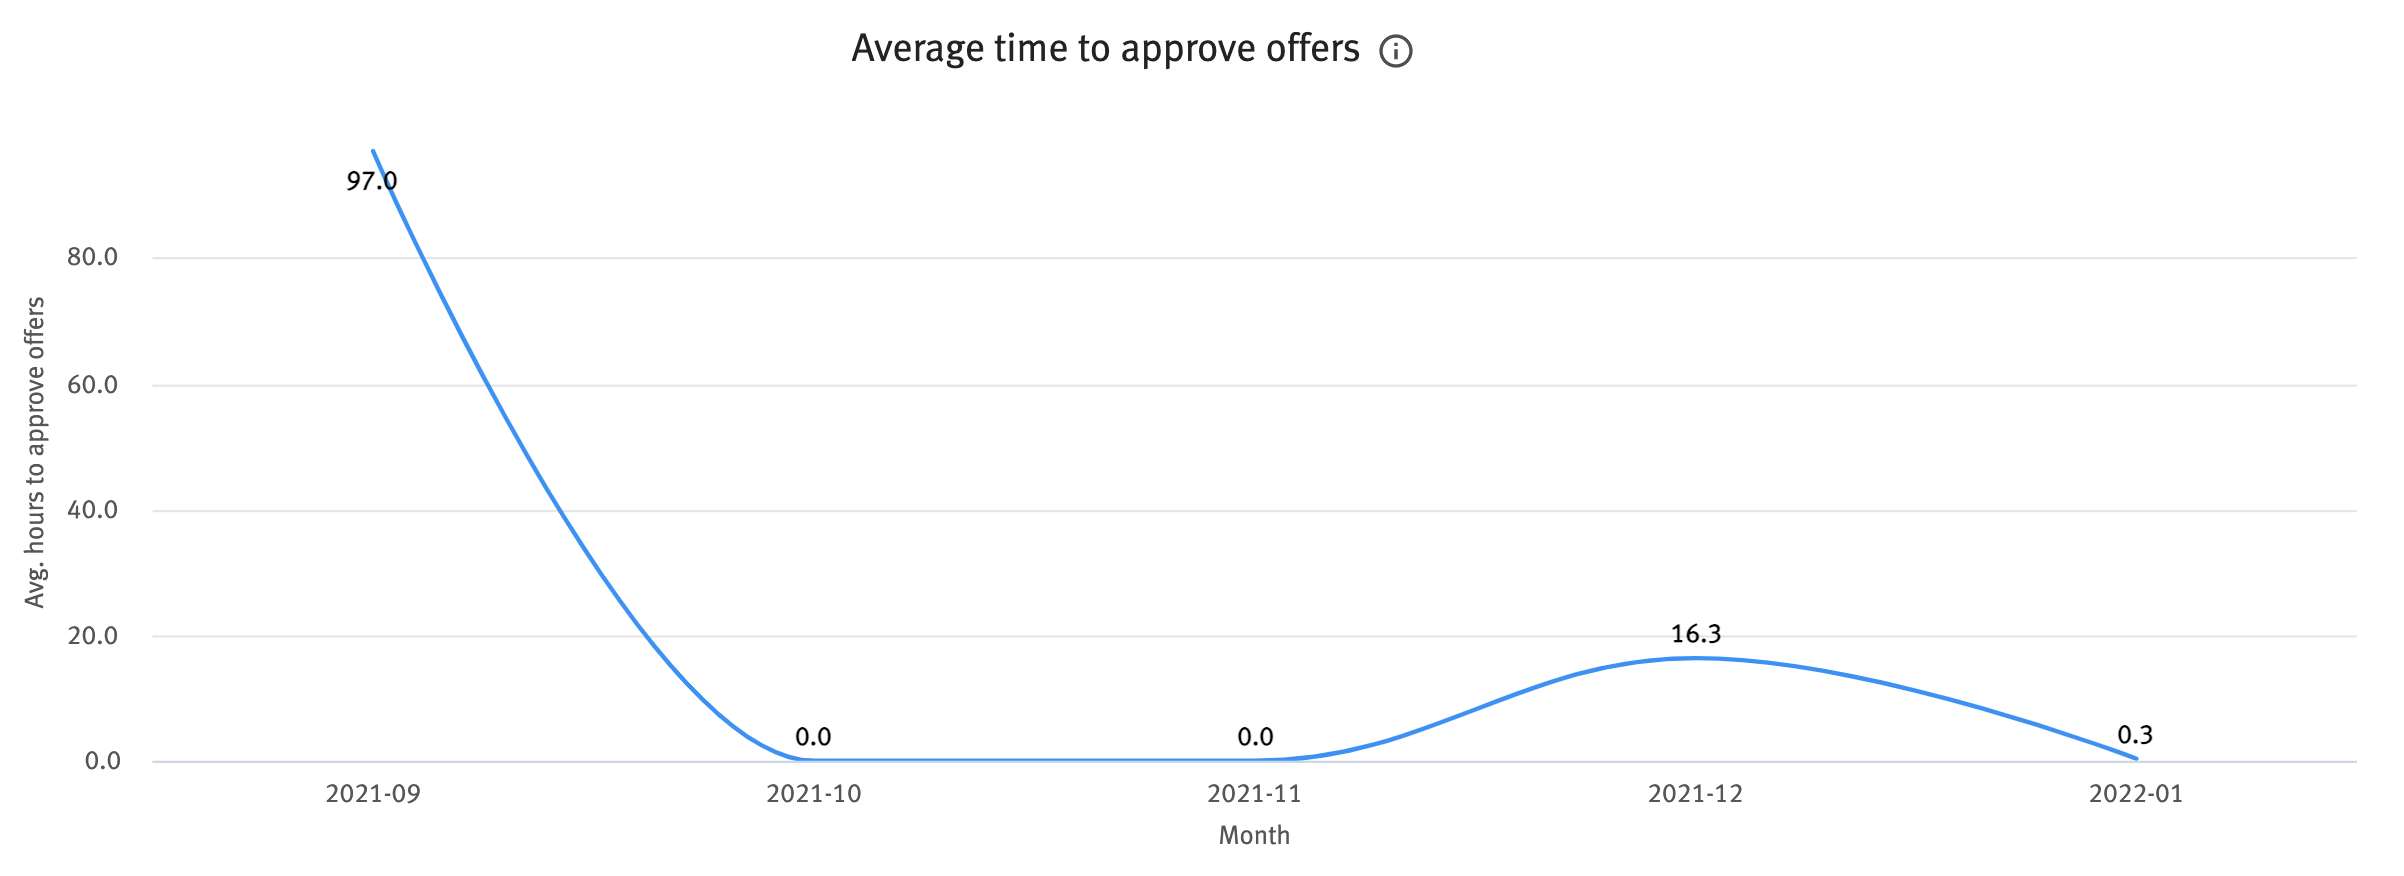 Average time to approve offers chart